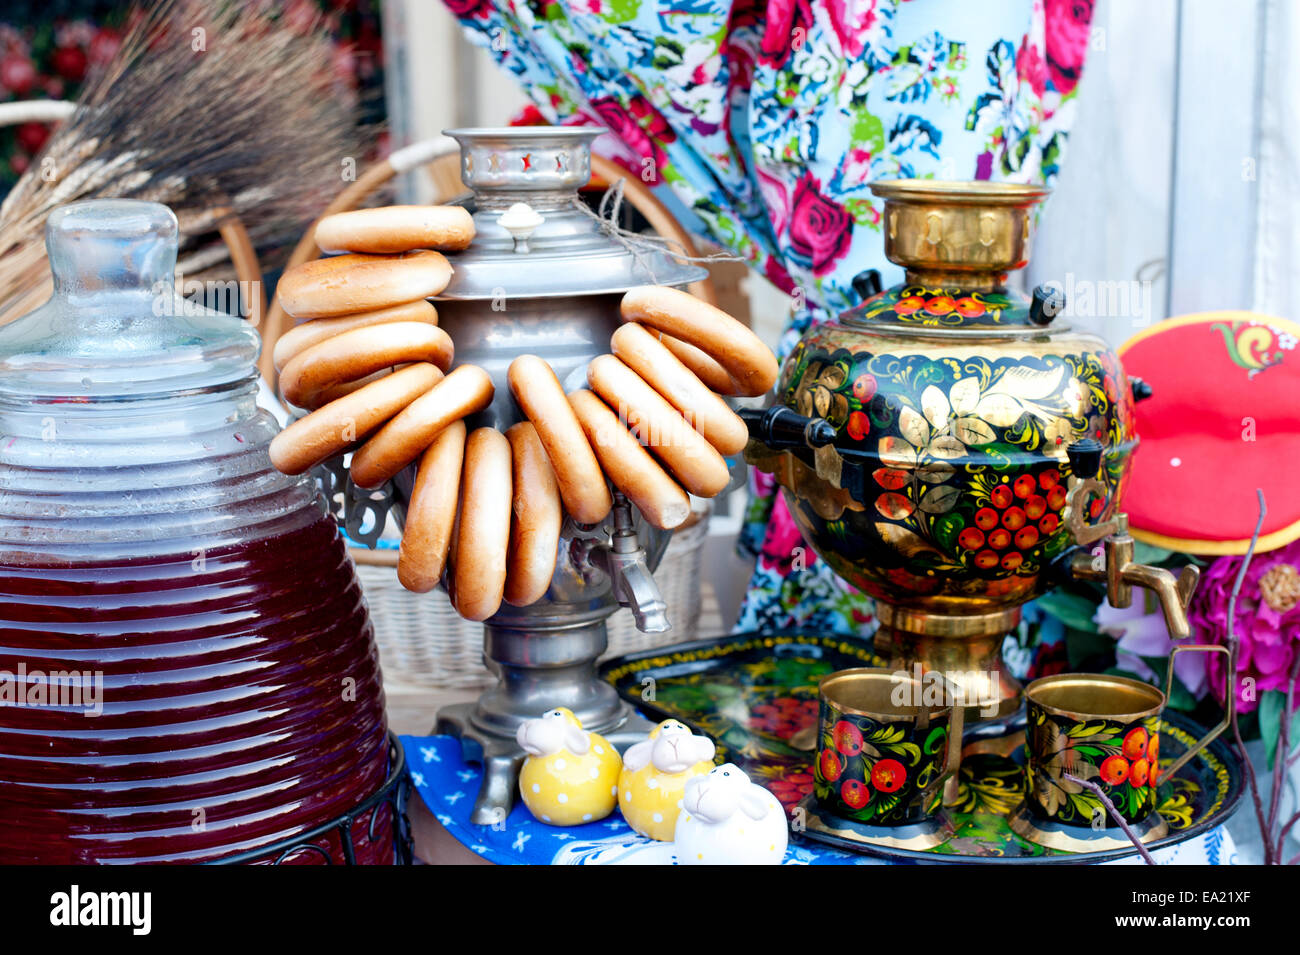 Traditional Russian tea and snack food Stock Photo